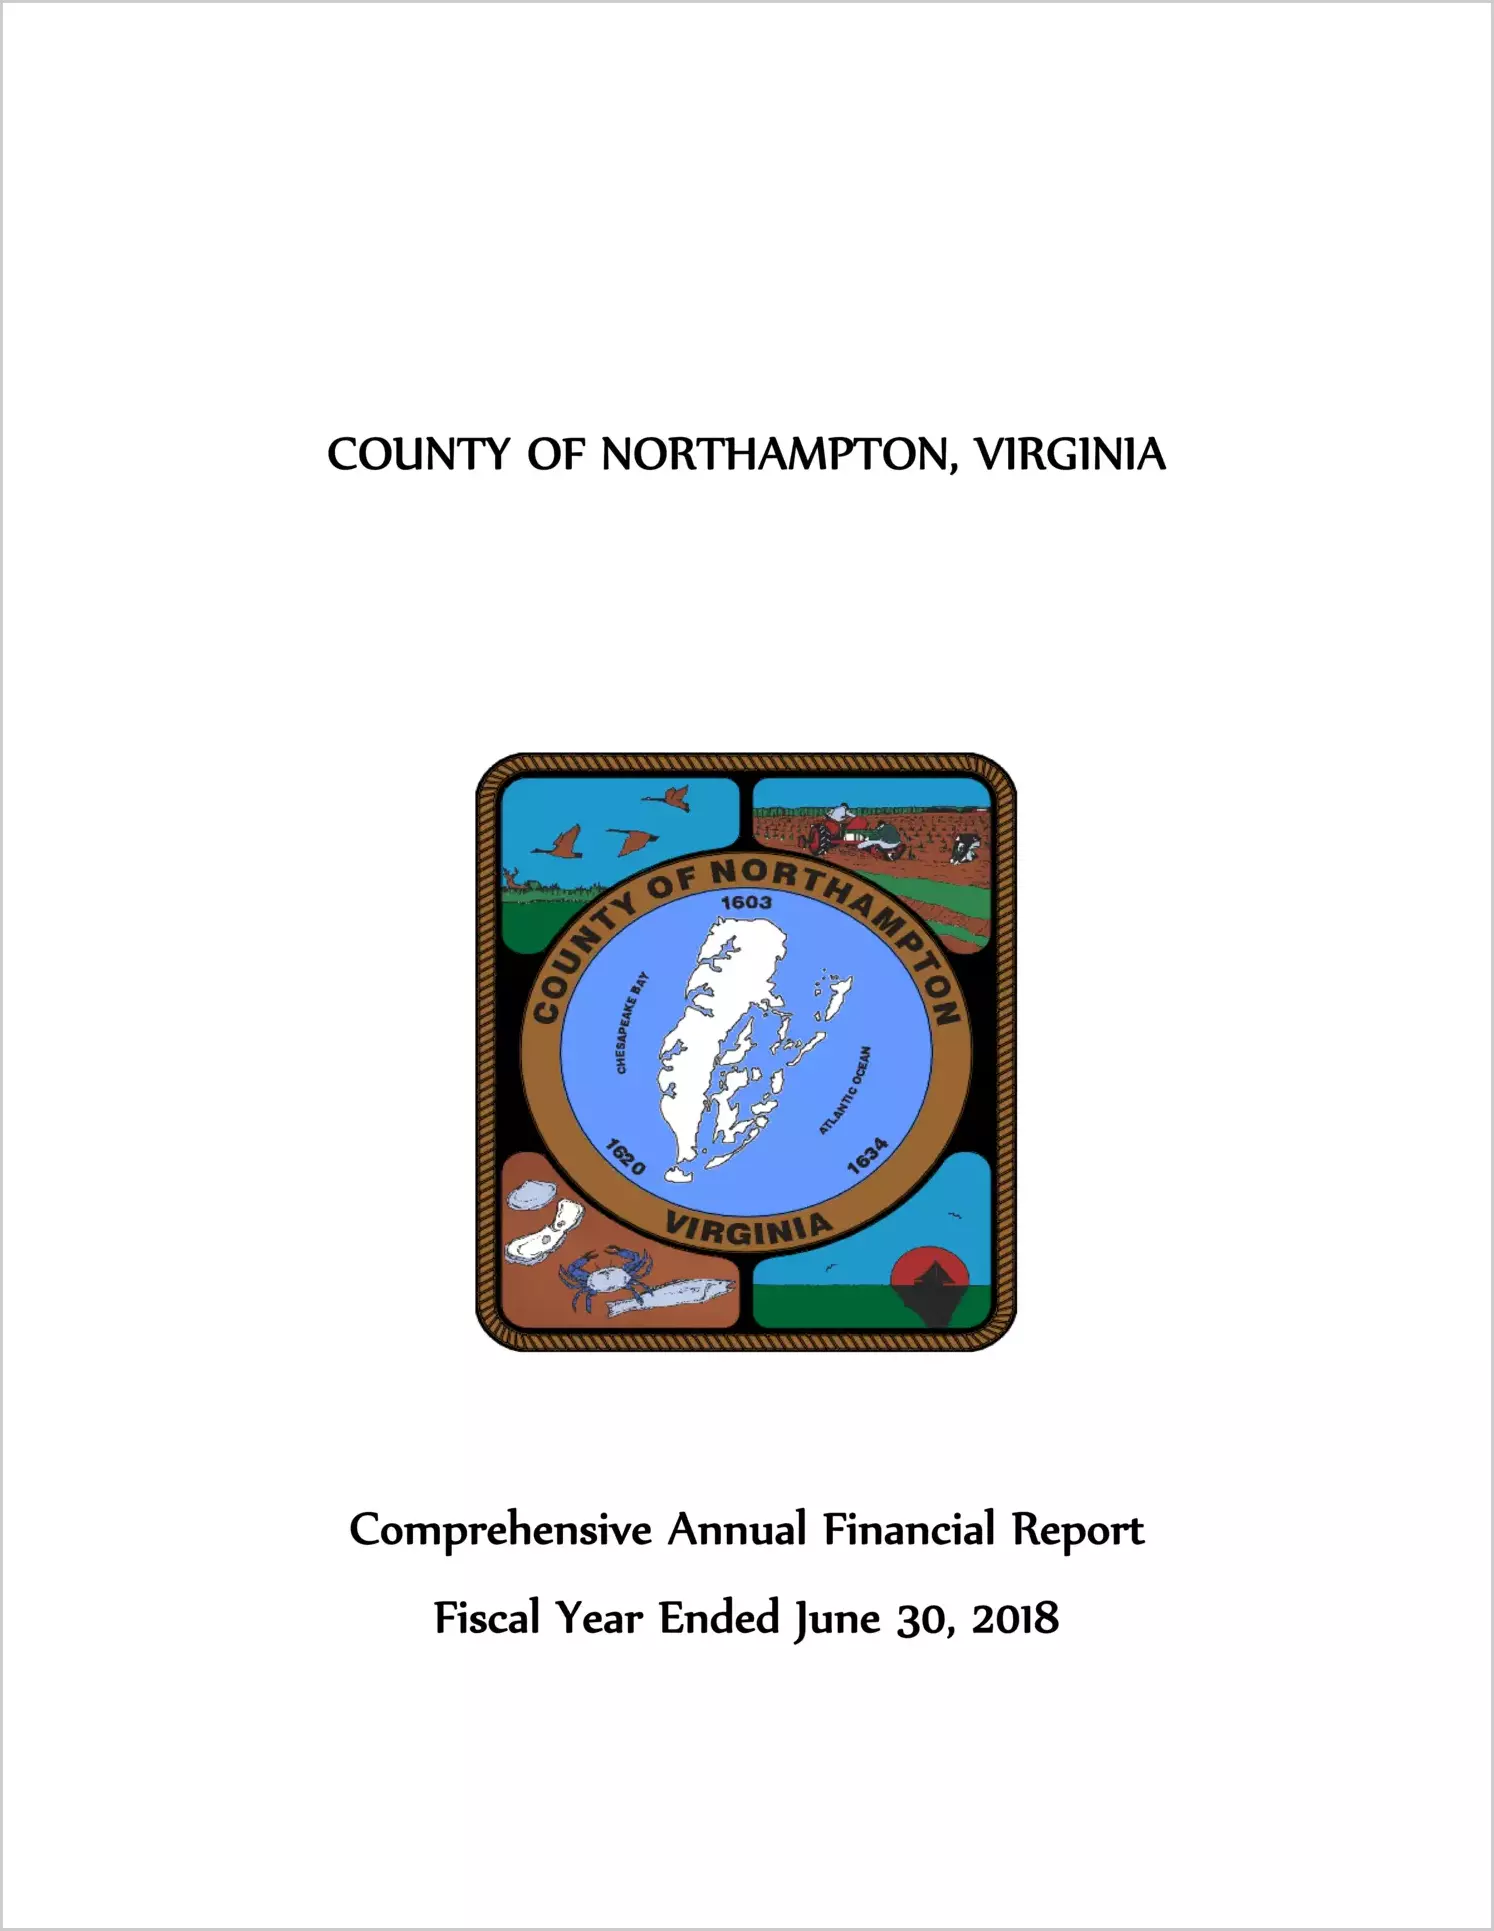 2018 Annual Financial Report for County of Northampton